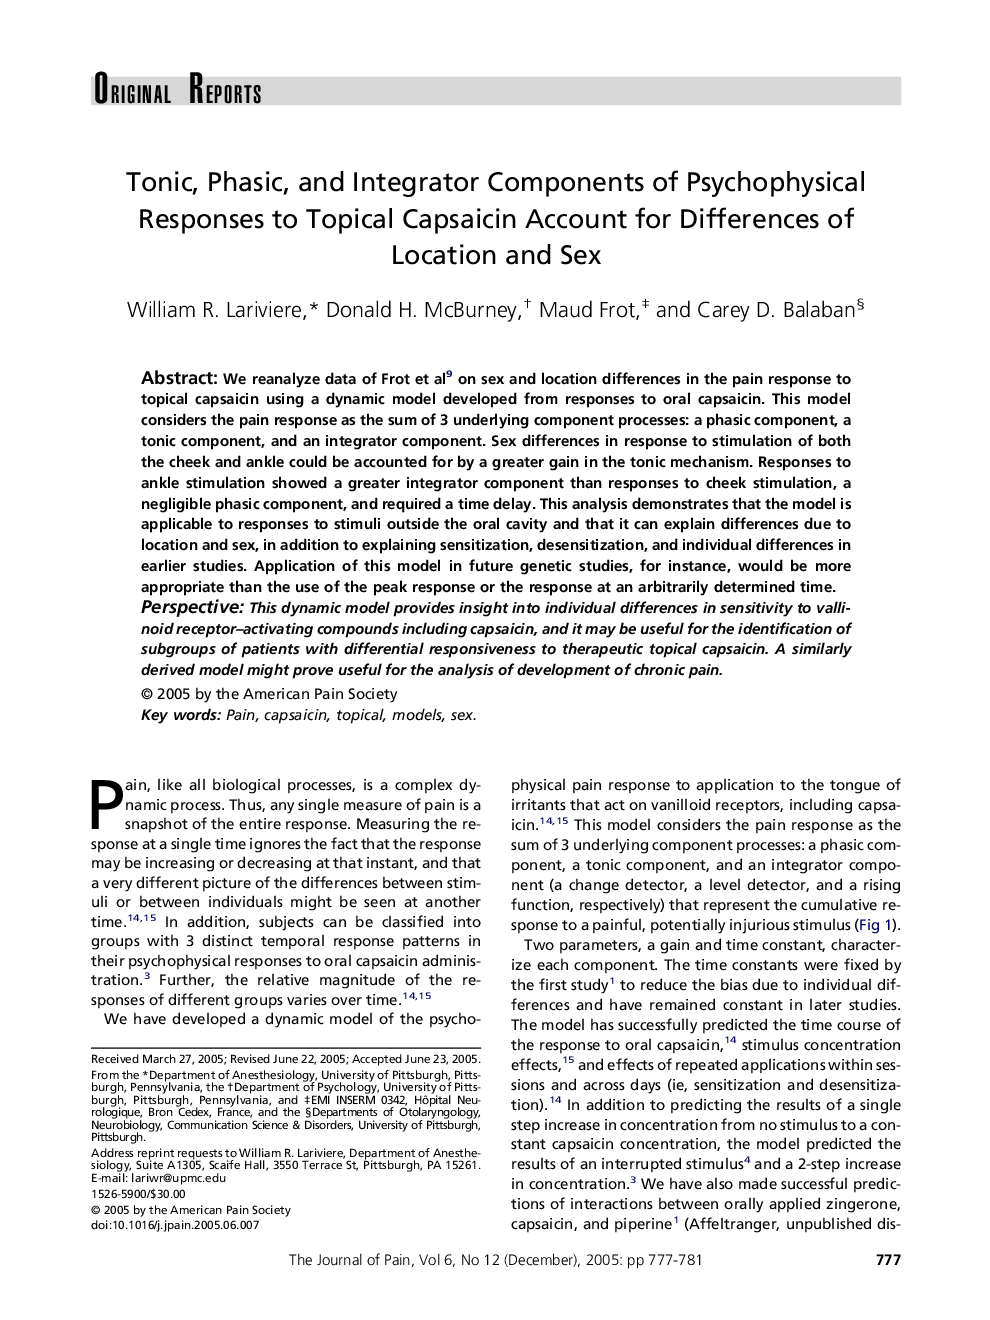 Tonic, Phasic, and Integrator Components of Psychophysical Responses to Topical Capsaicin Account for Differences of Location and Sex